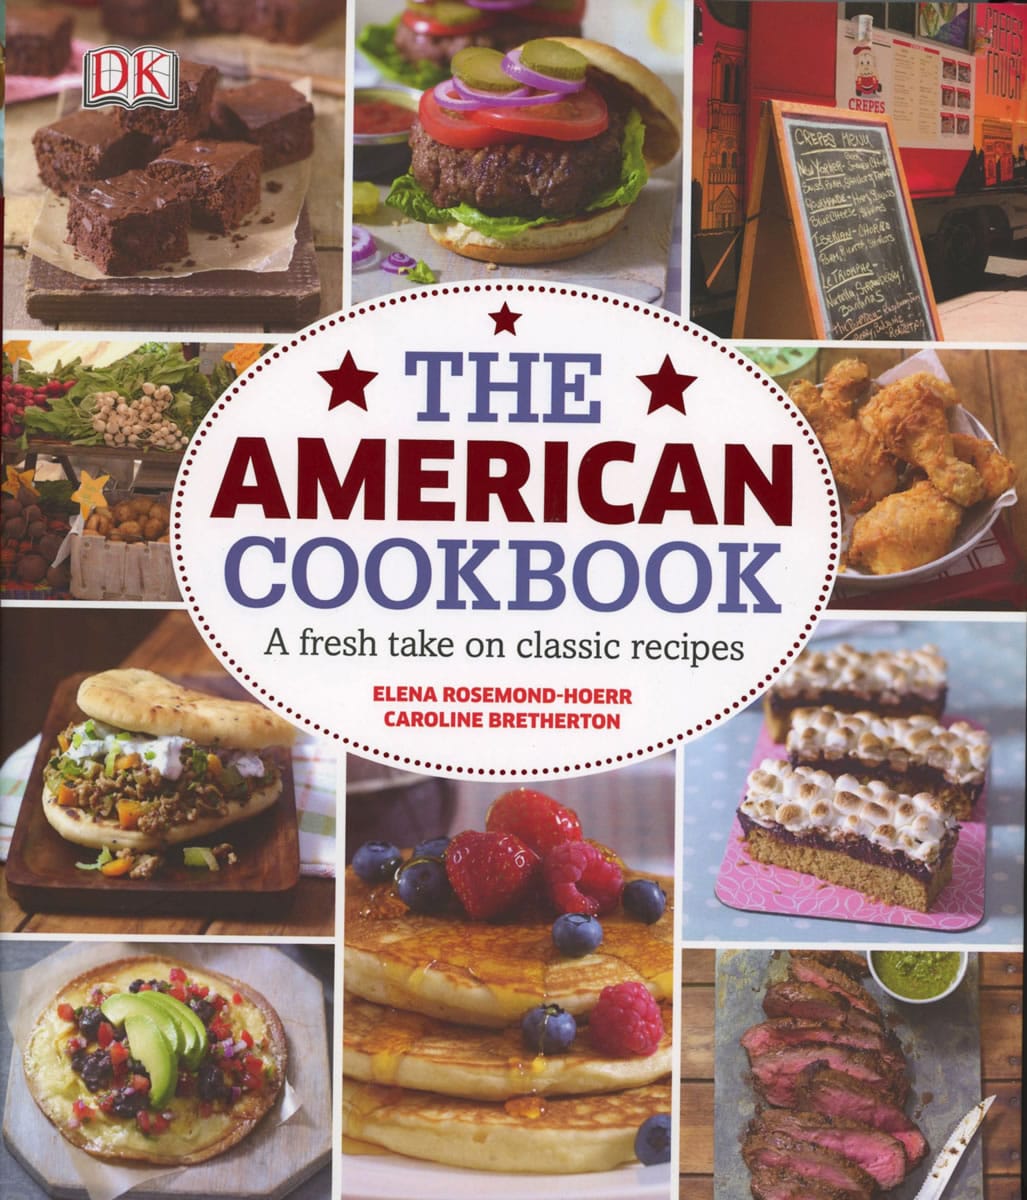 Fans of all-American cooking can travel the countryside through &quot;The American Cookbook, A Fresh Take on Classic Recipes&quot; ($25, hardcover, DK Publishing) by Elena Rosemond-Hoerr and Caroline Bretherton.